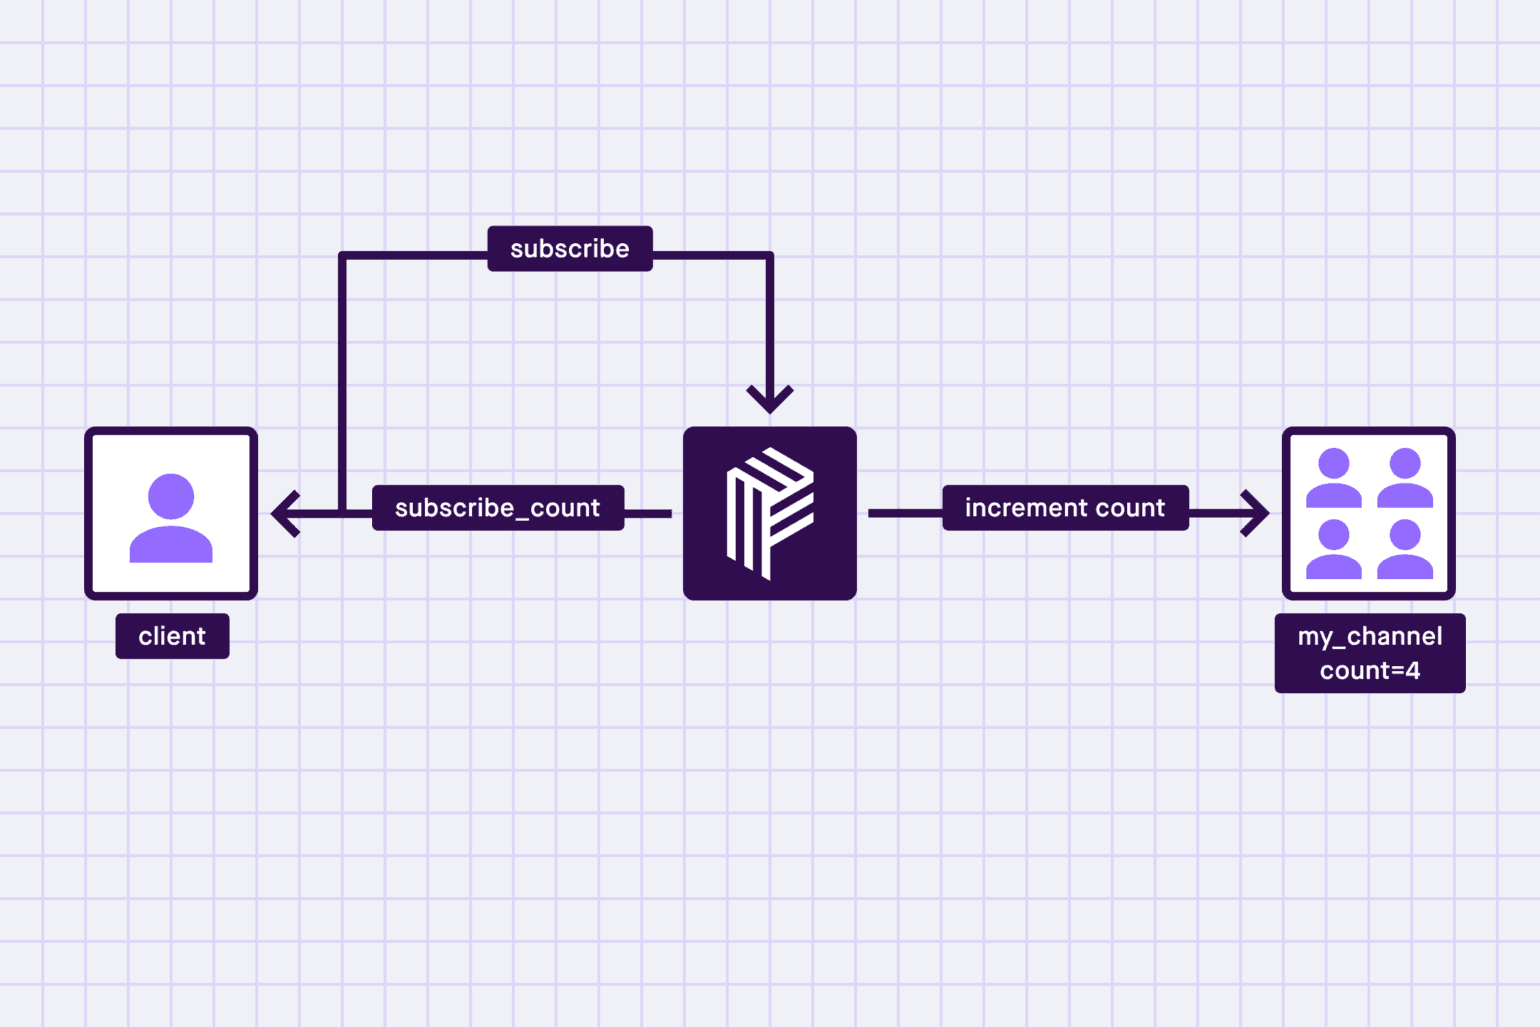 How subscription count events work in Pusher Channels